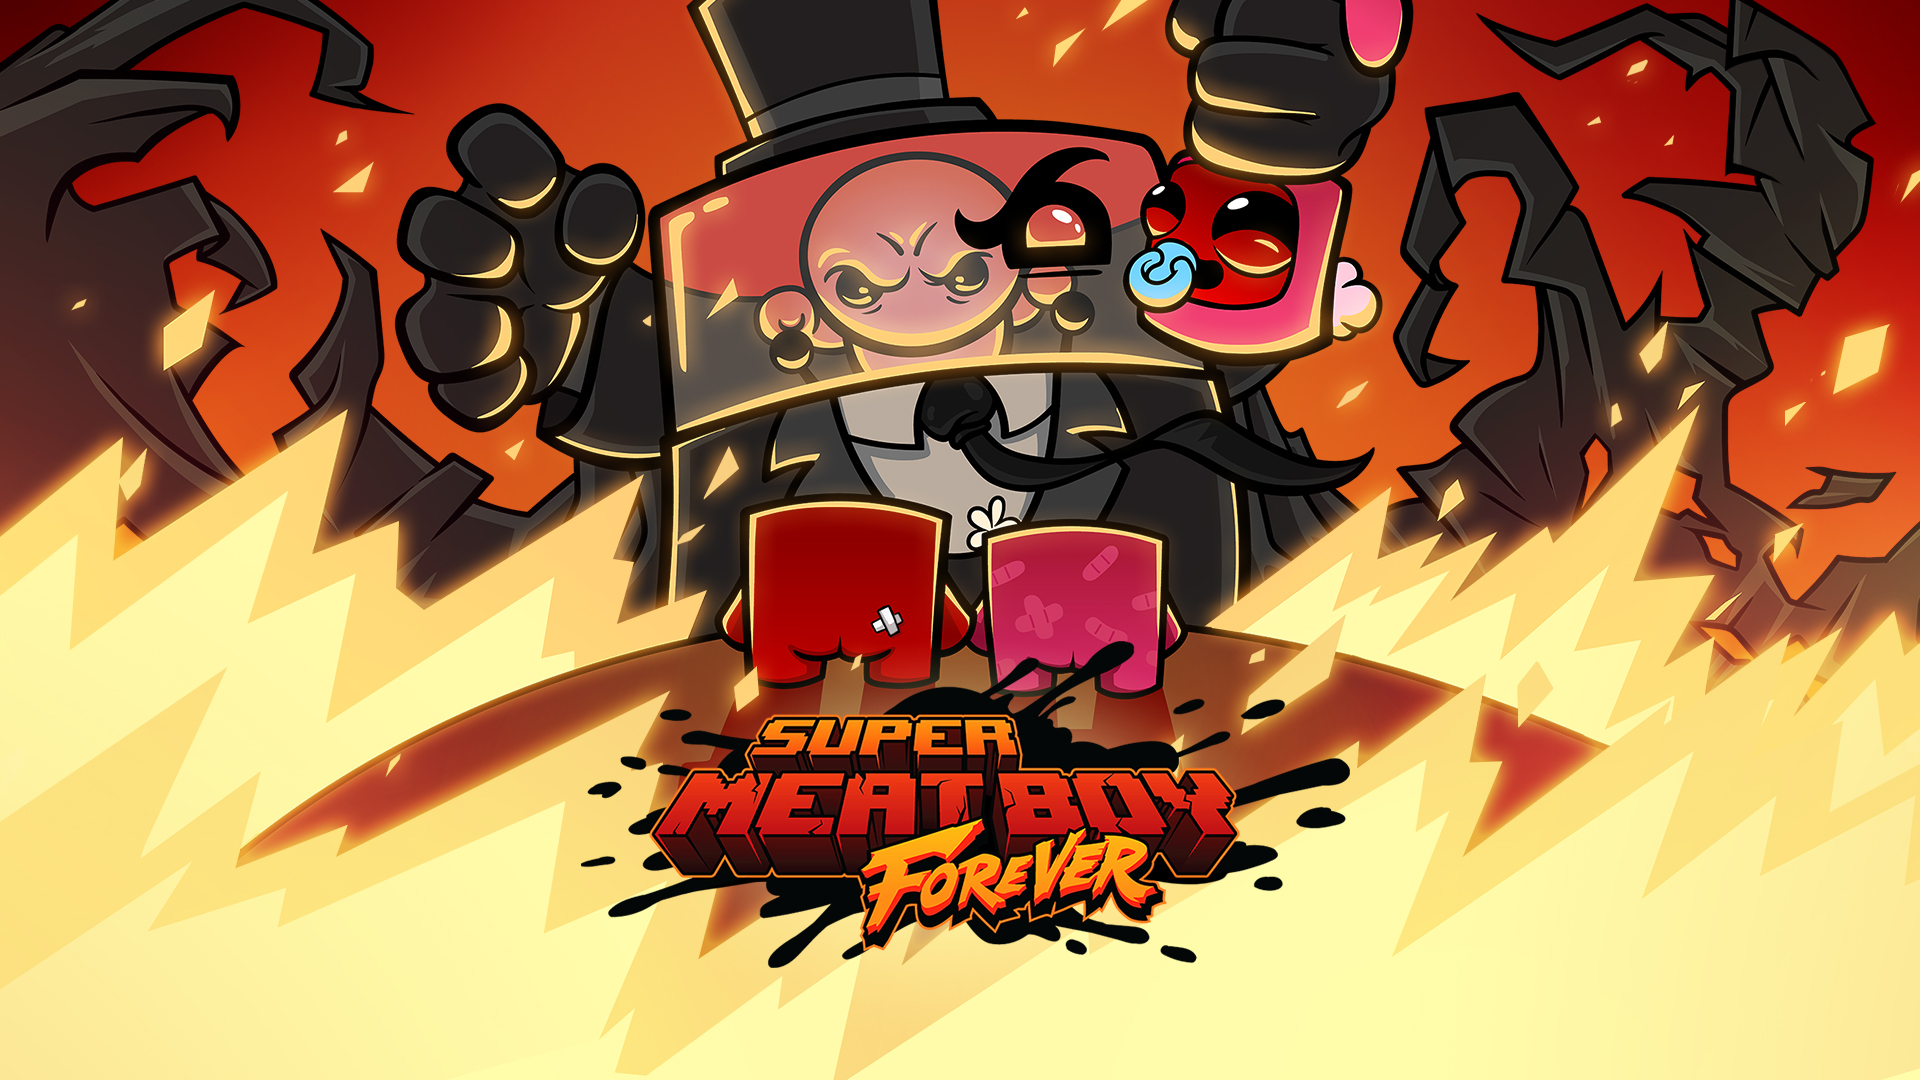 Super Meat Boy is a 2010 platform game designed by Edmund McMillen and Tommy Refenes under the collective name of "Team Meat". It was self-published as the successor to Meat Boy, a 2008 flash game designed by McMillen and Jonathan McEntee.